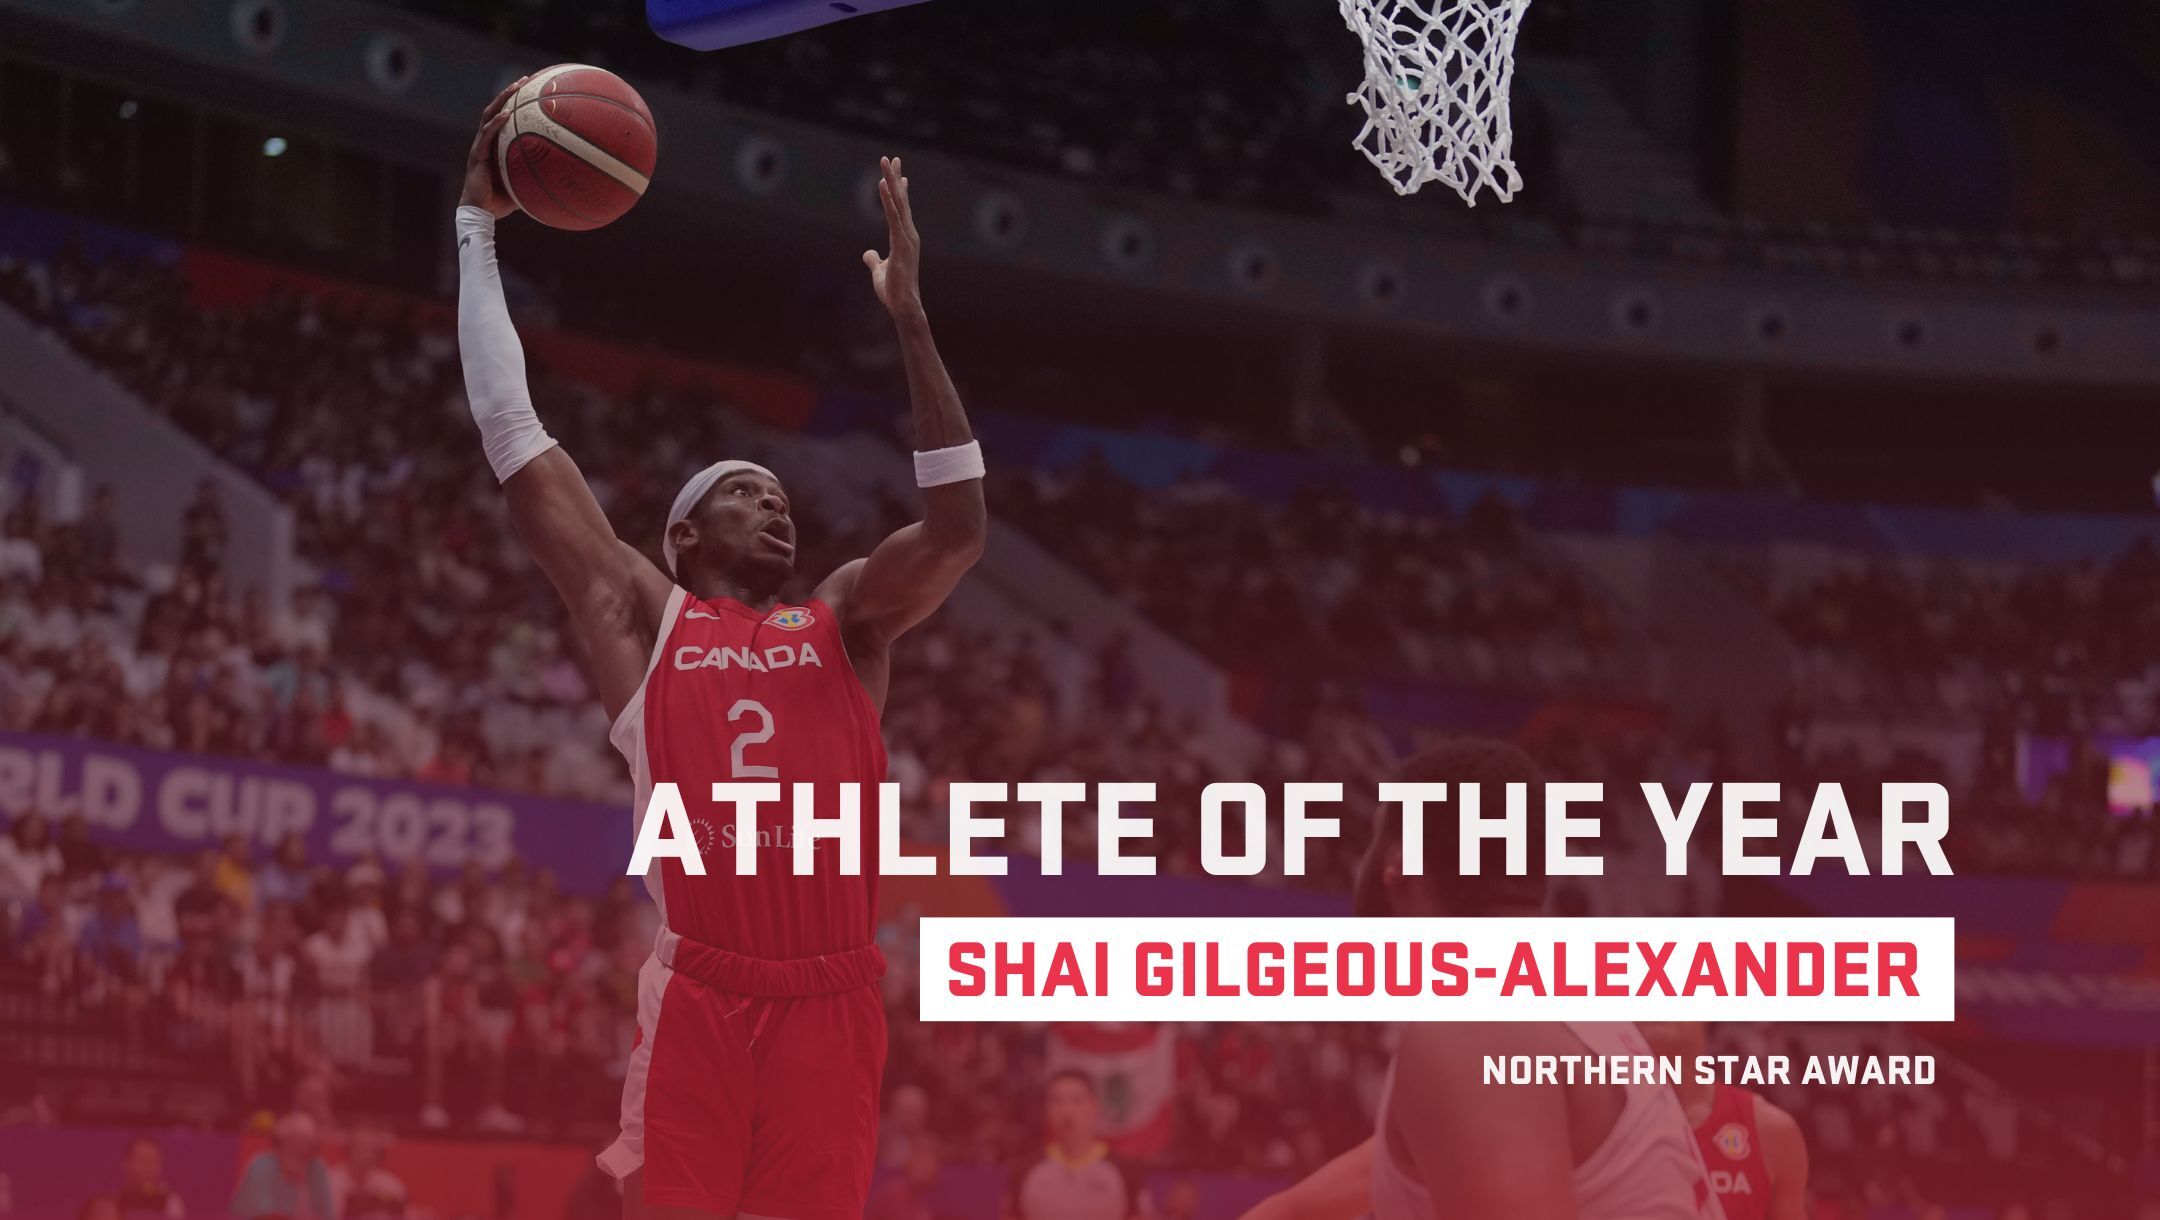 Shai Gilgeous-Alexander has been named the 2023 Canadian Athlete of the Year – Team Canada